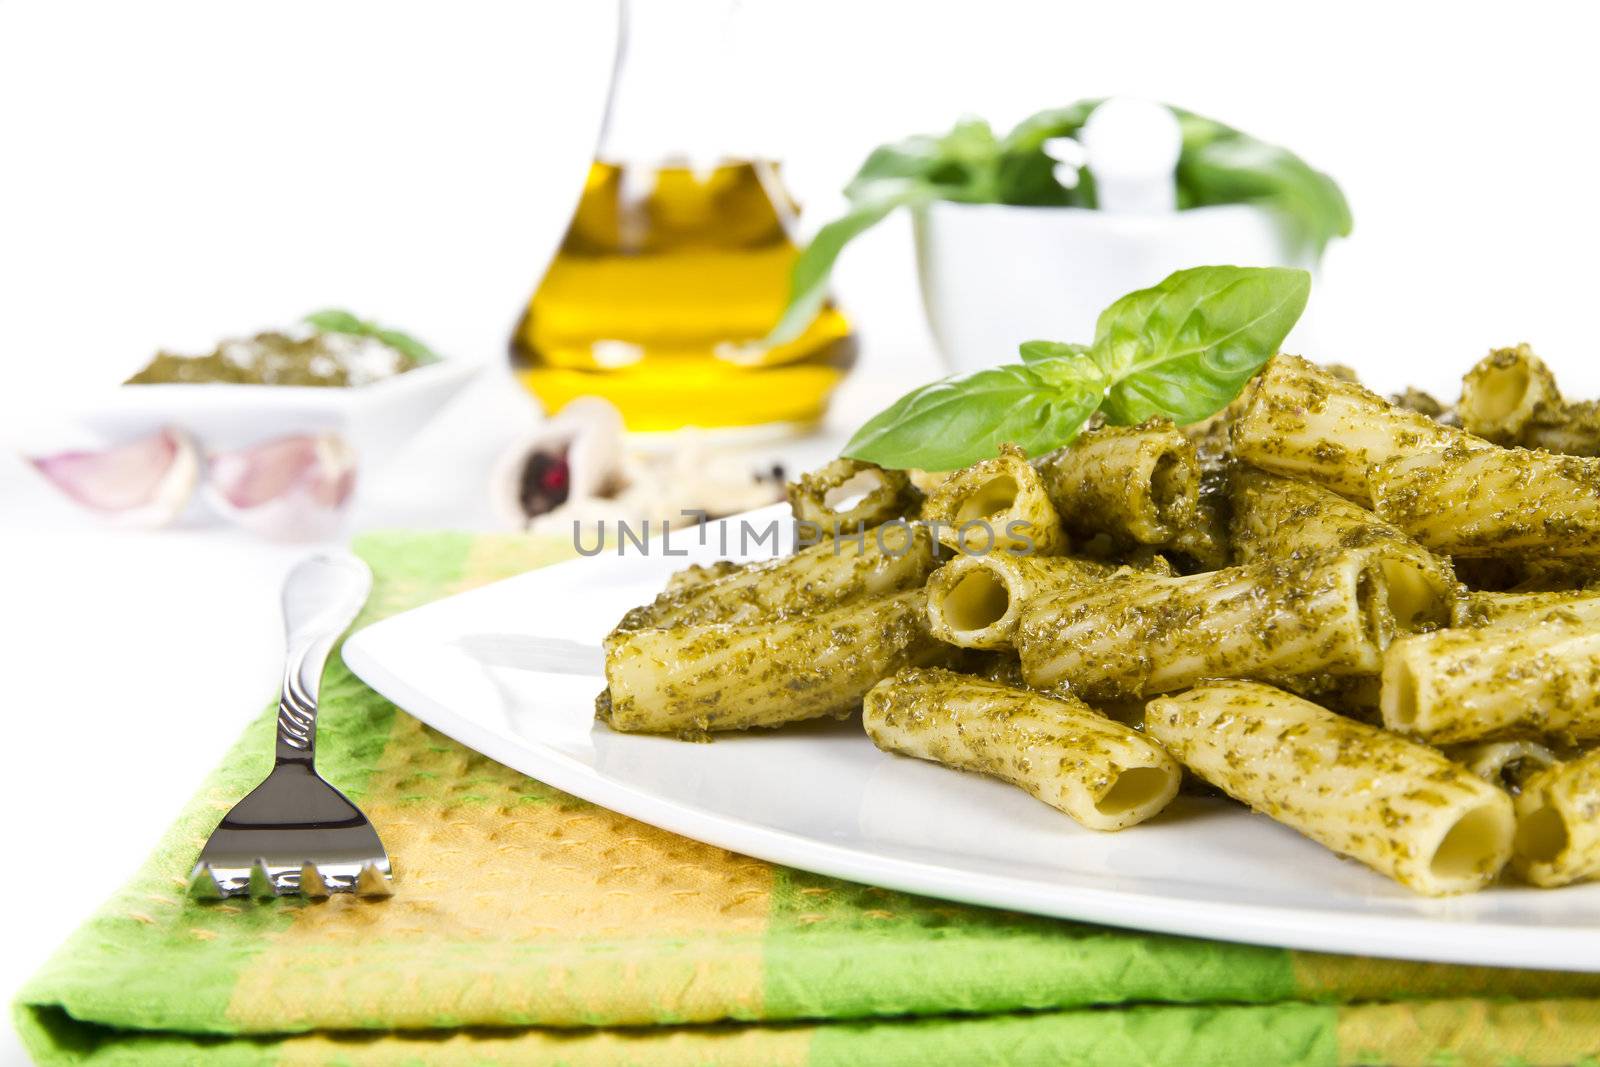 Pasta with pesto sauce and ingredients over white